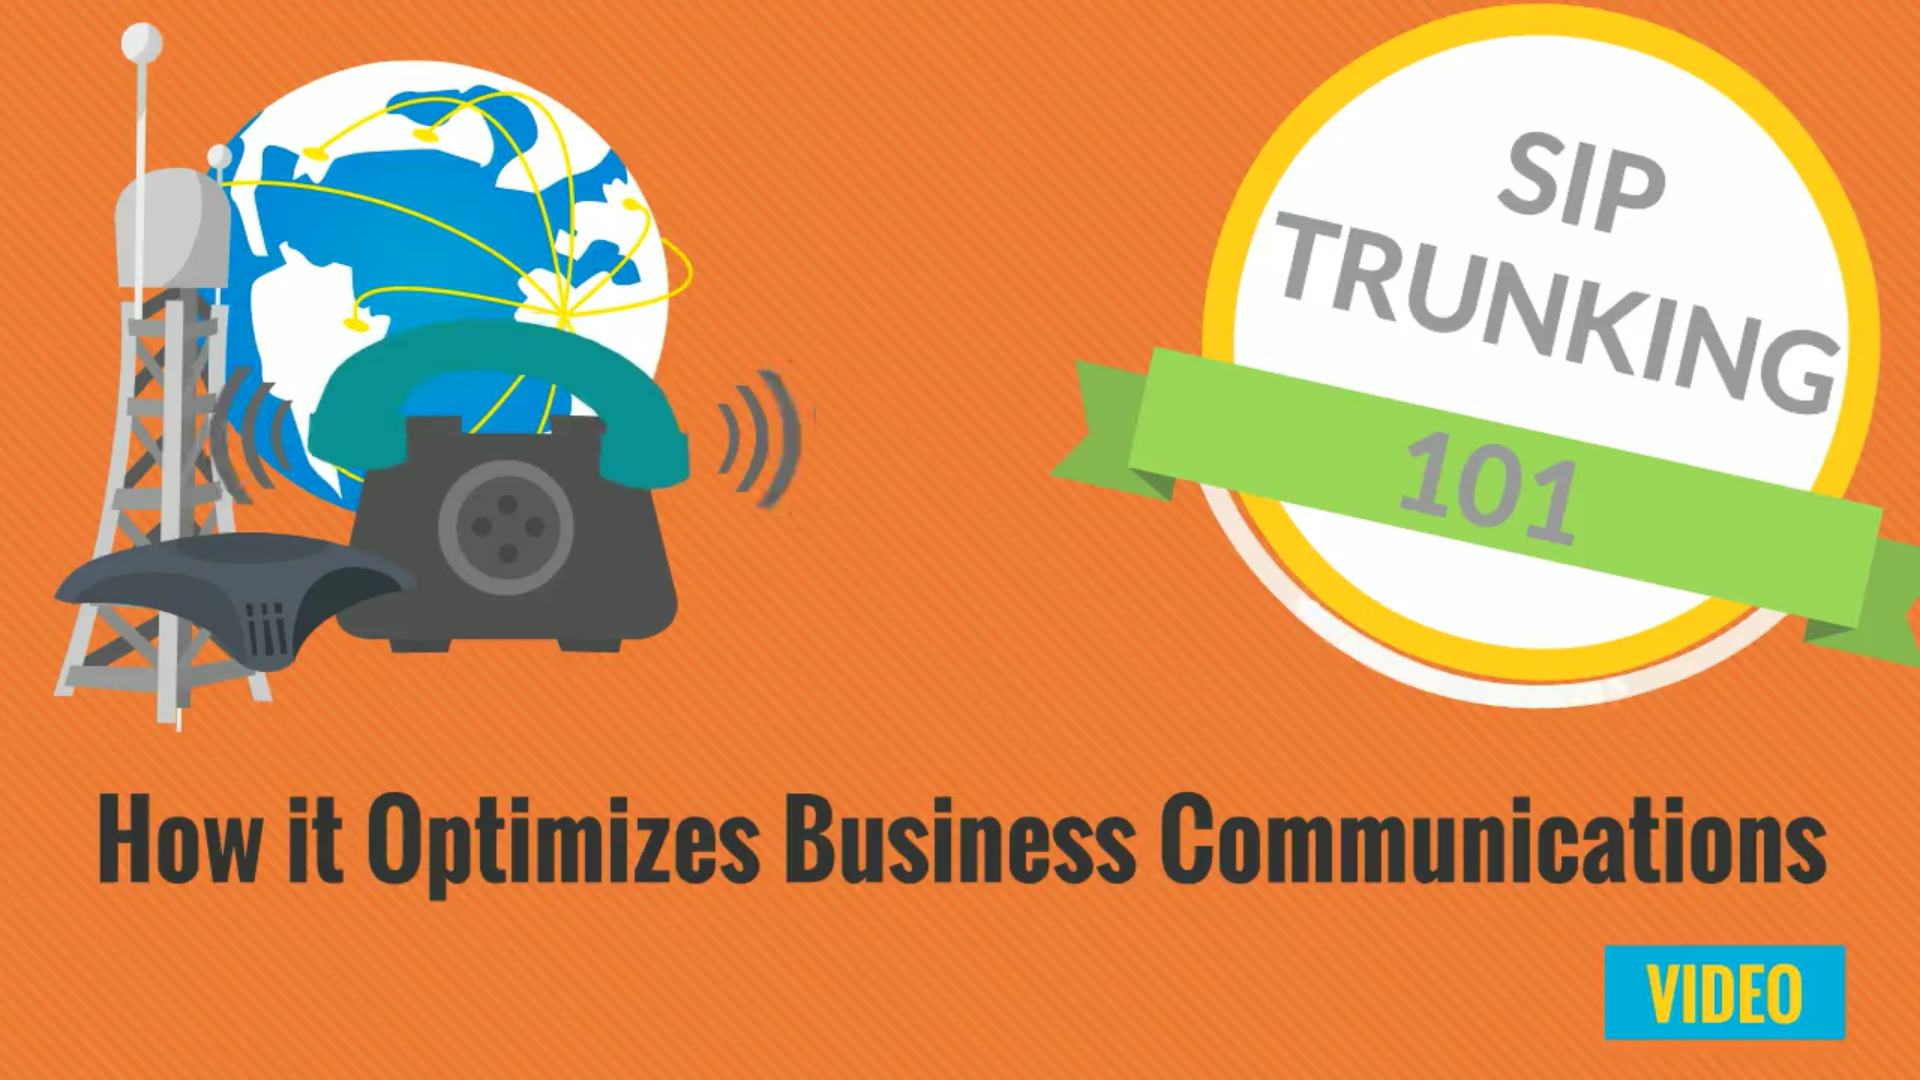 How SIP TRUNKING Optimizes Business Communications